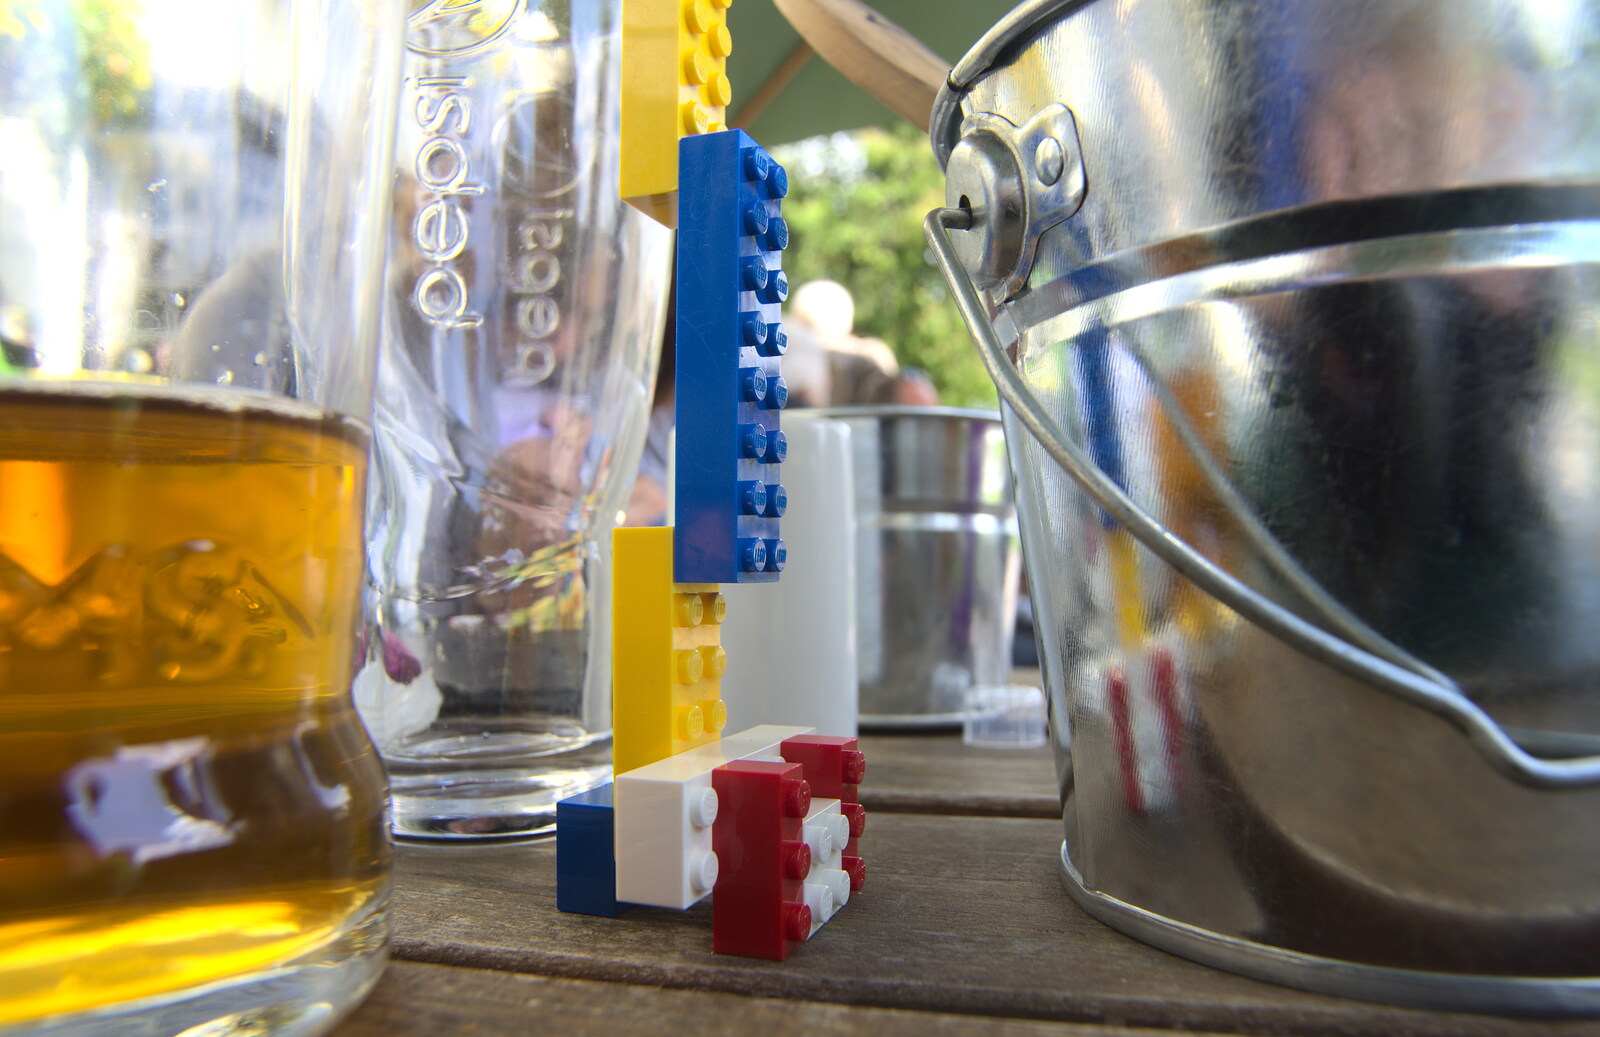 Another of Fred's Lego creations from The BSCC Cycling Weekend, The Swan Inn, Thaxted, Essex - 12th May 2012